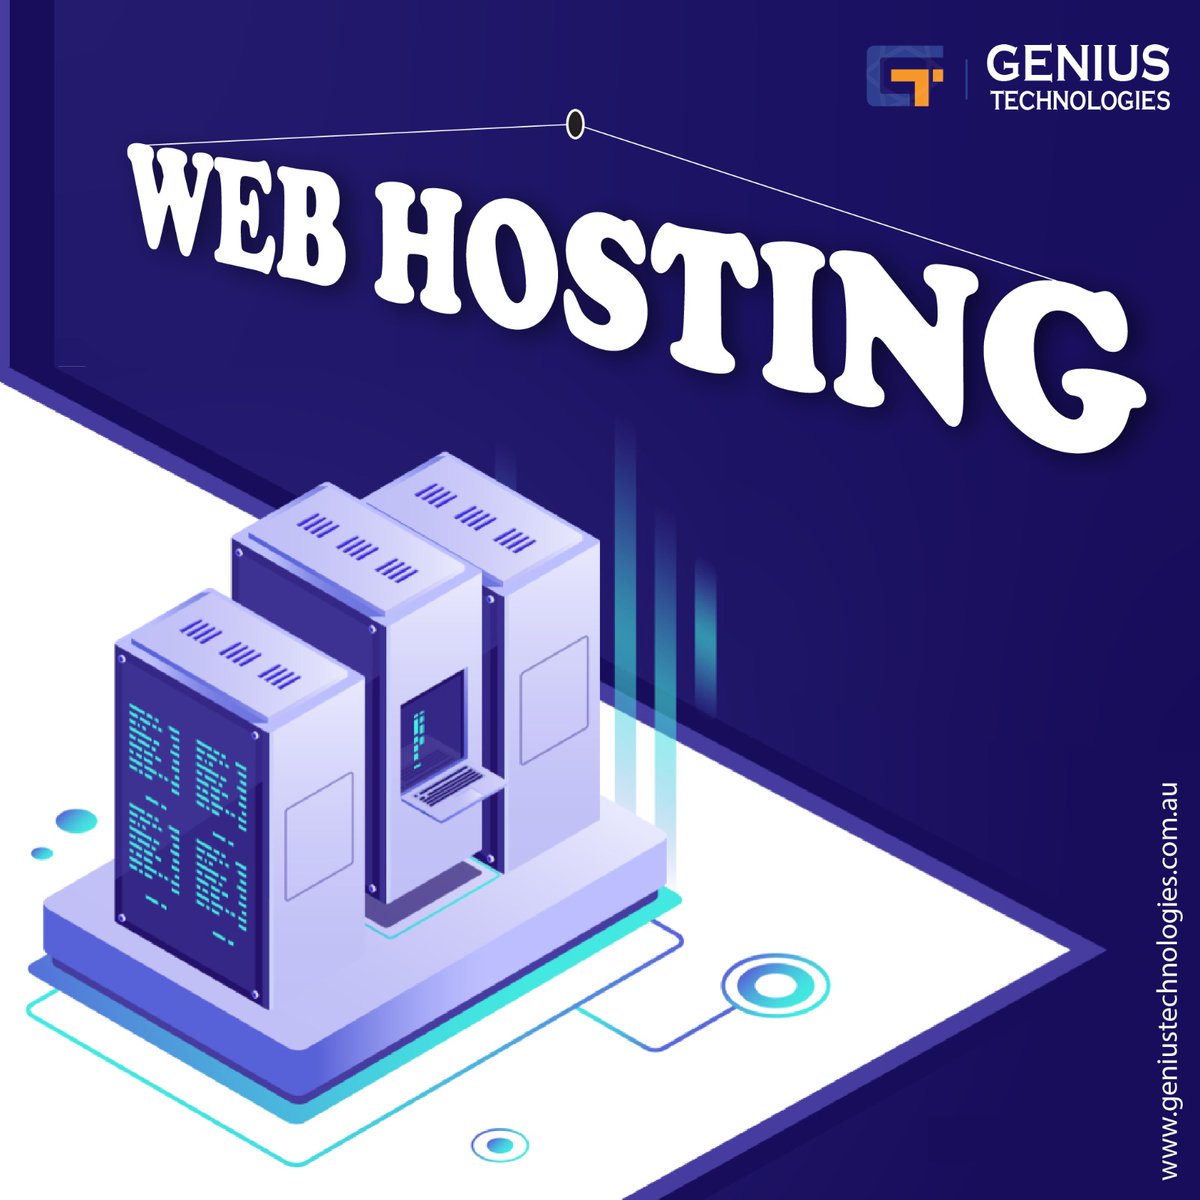 Upgrade your website with reliable web hosting services that guarantee top-notch security, advanced infrastructure, and excellent technical support. Trust us for a fast, secure, and accessible website. 
.
.
#geniustechnologies #WebHosting #ReliableService #technicalsupport ⚡️🌐